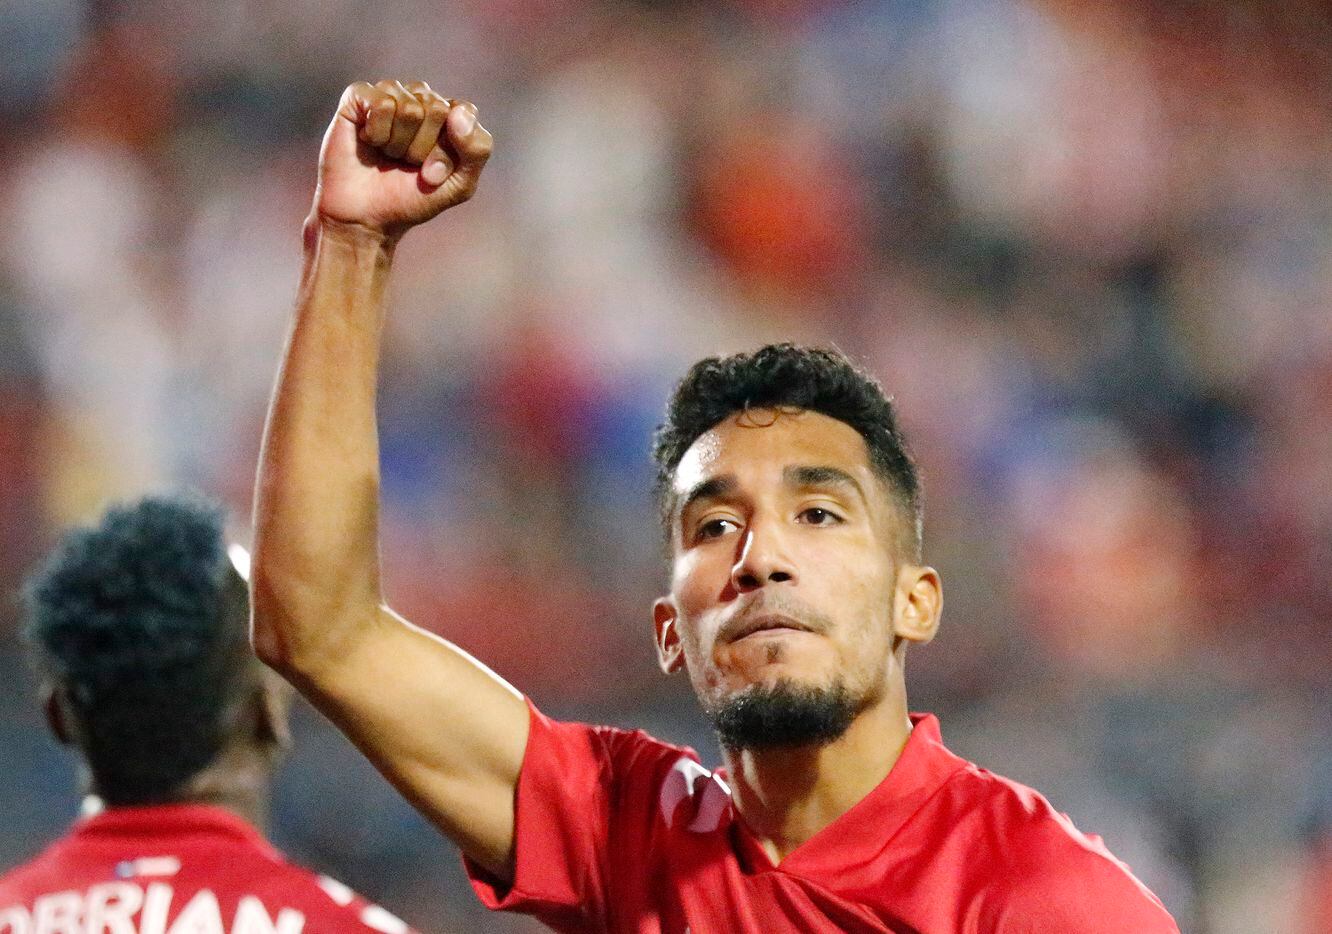 FC Dallas forward Jesus Ferreira (9) celebrates after scoring a goal during the first half as FC Dallas hosted Austin FC at Toyota Stadium in Frisco on Saturday, October 30, 2021.